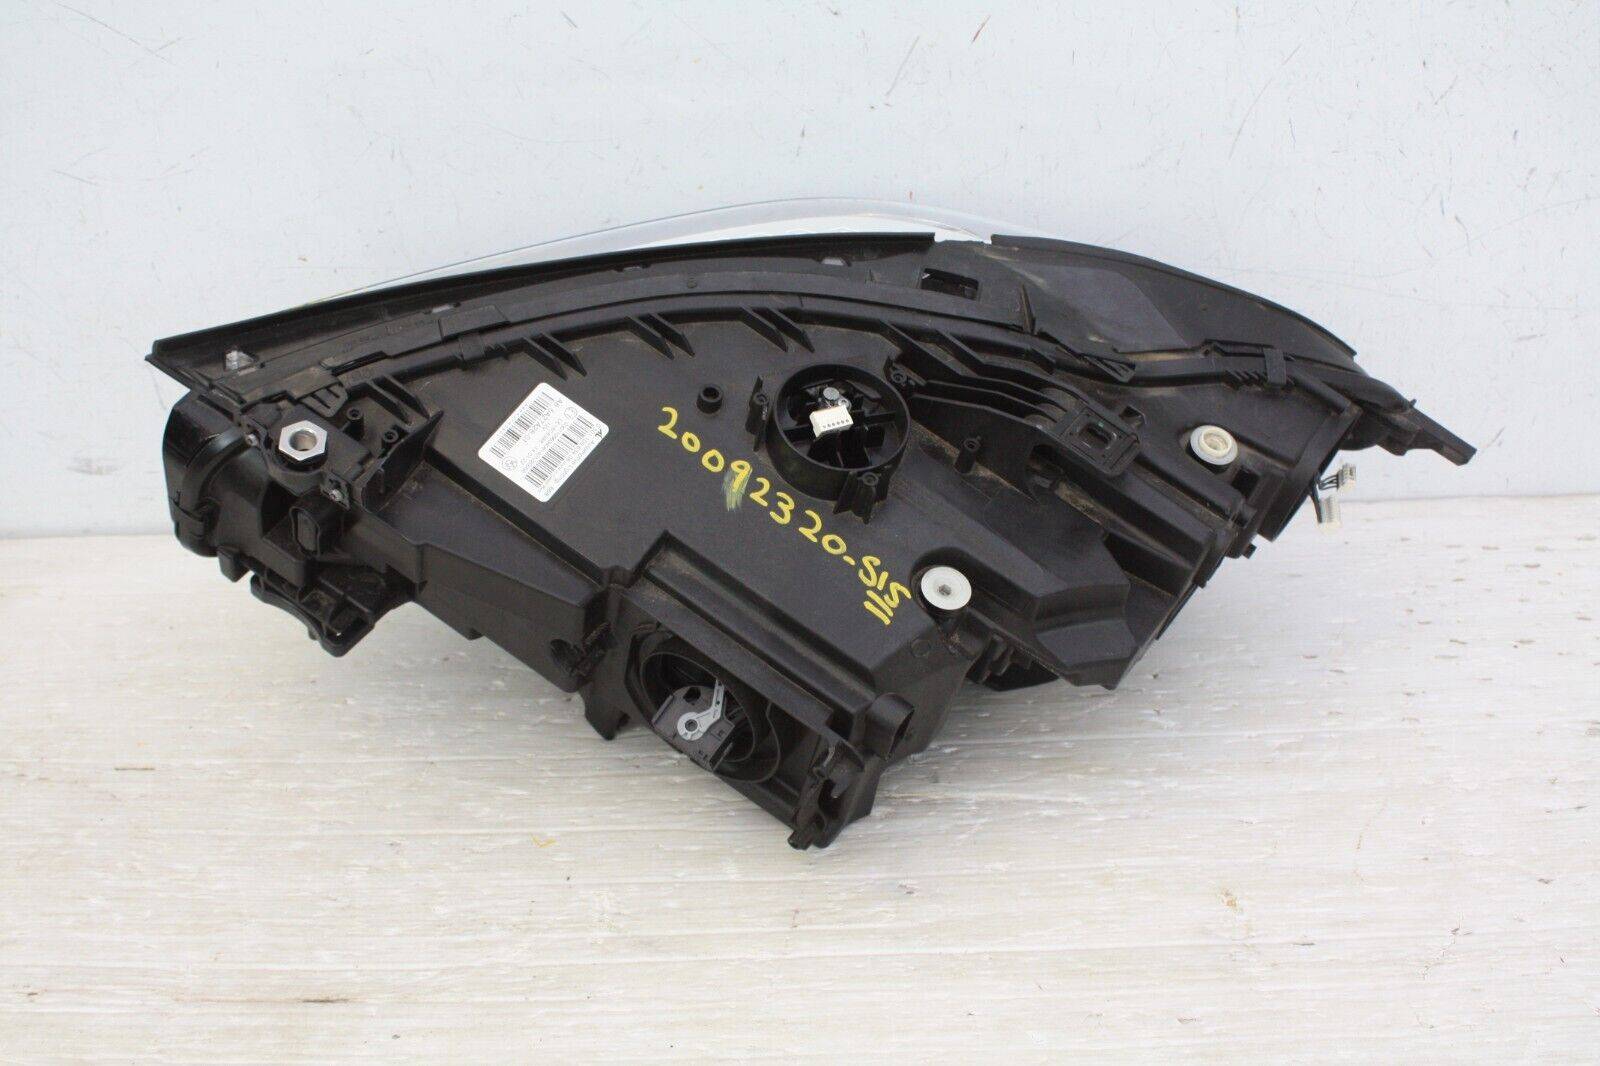 BMW-M8-F91-LED-Right-Side-Headlight-5A27A28-01-Genuine-LENS-CRACKED-175911614232-9